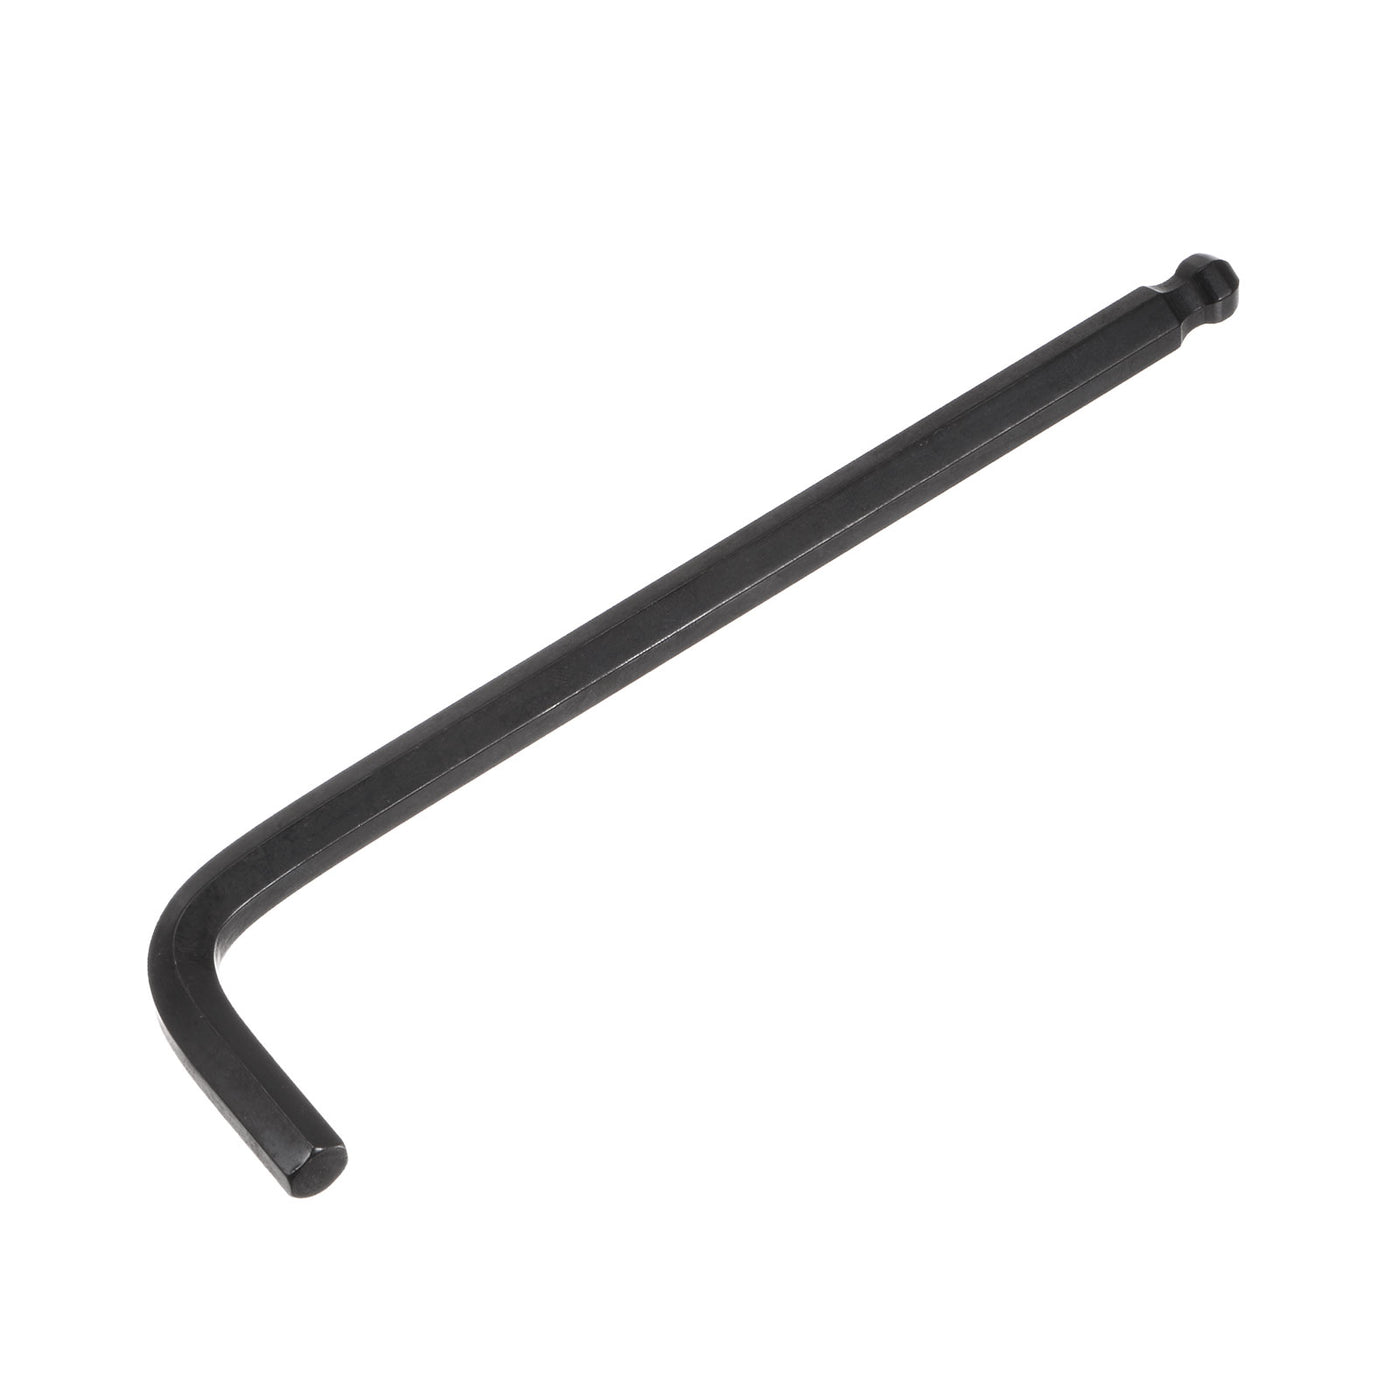 uxcell Uxcell 8mm Ball End Hex Key Wrench, L Shaped Long Arm CR-V Repairing Tool, Black